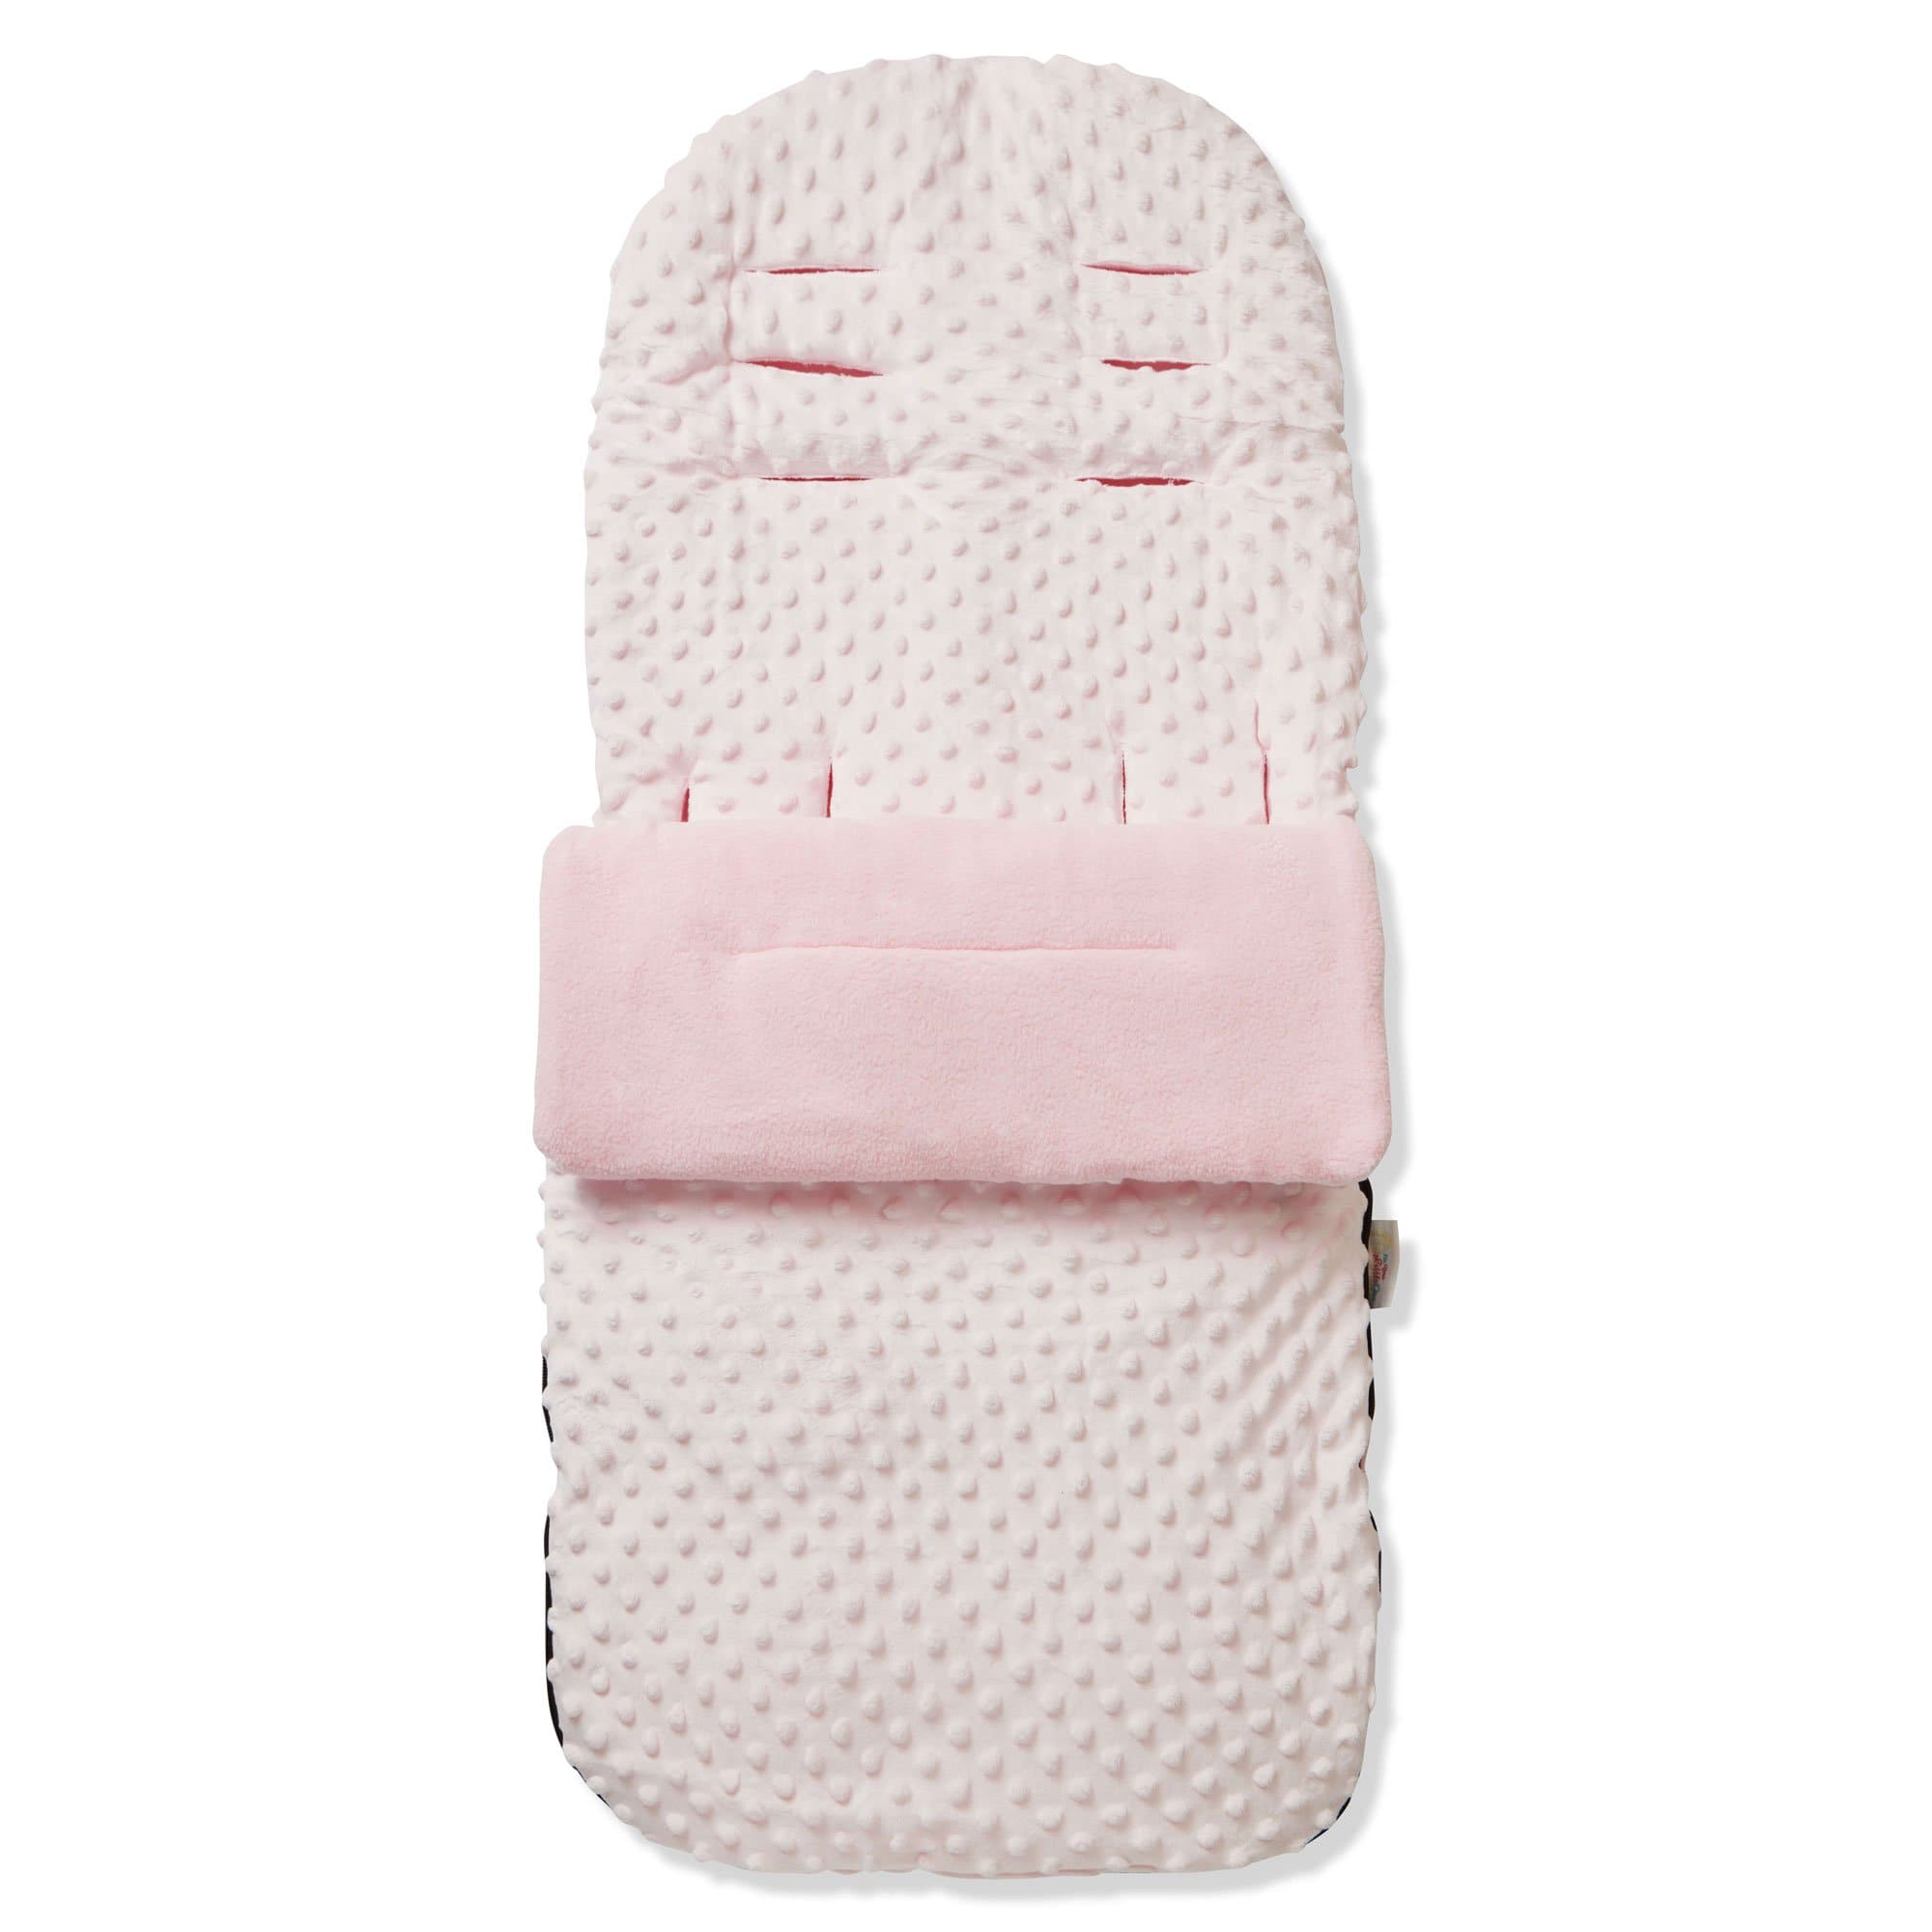 Dimple Footmuff / Cosy Toes Compatible with Seed - Pink / Fits All Models | For Your Little One